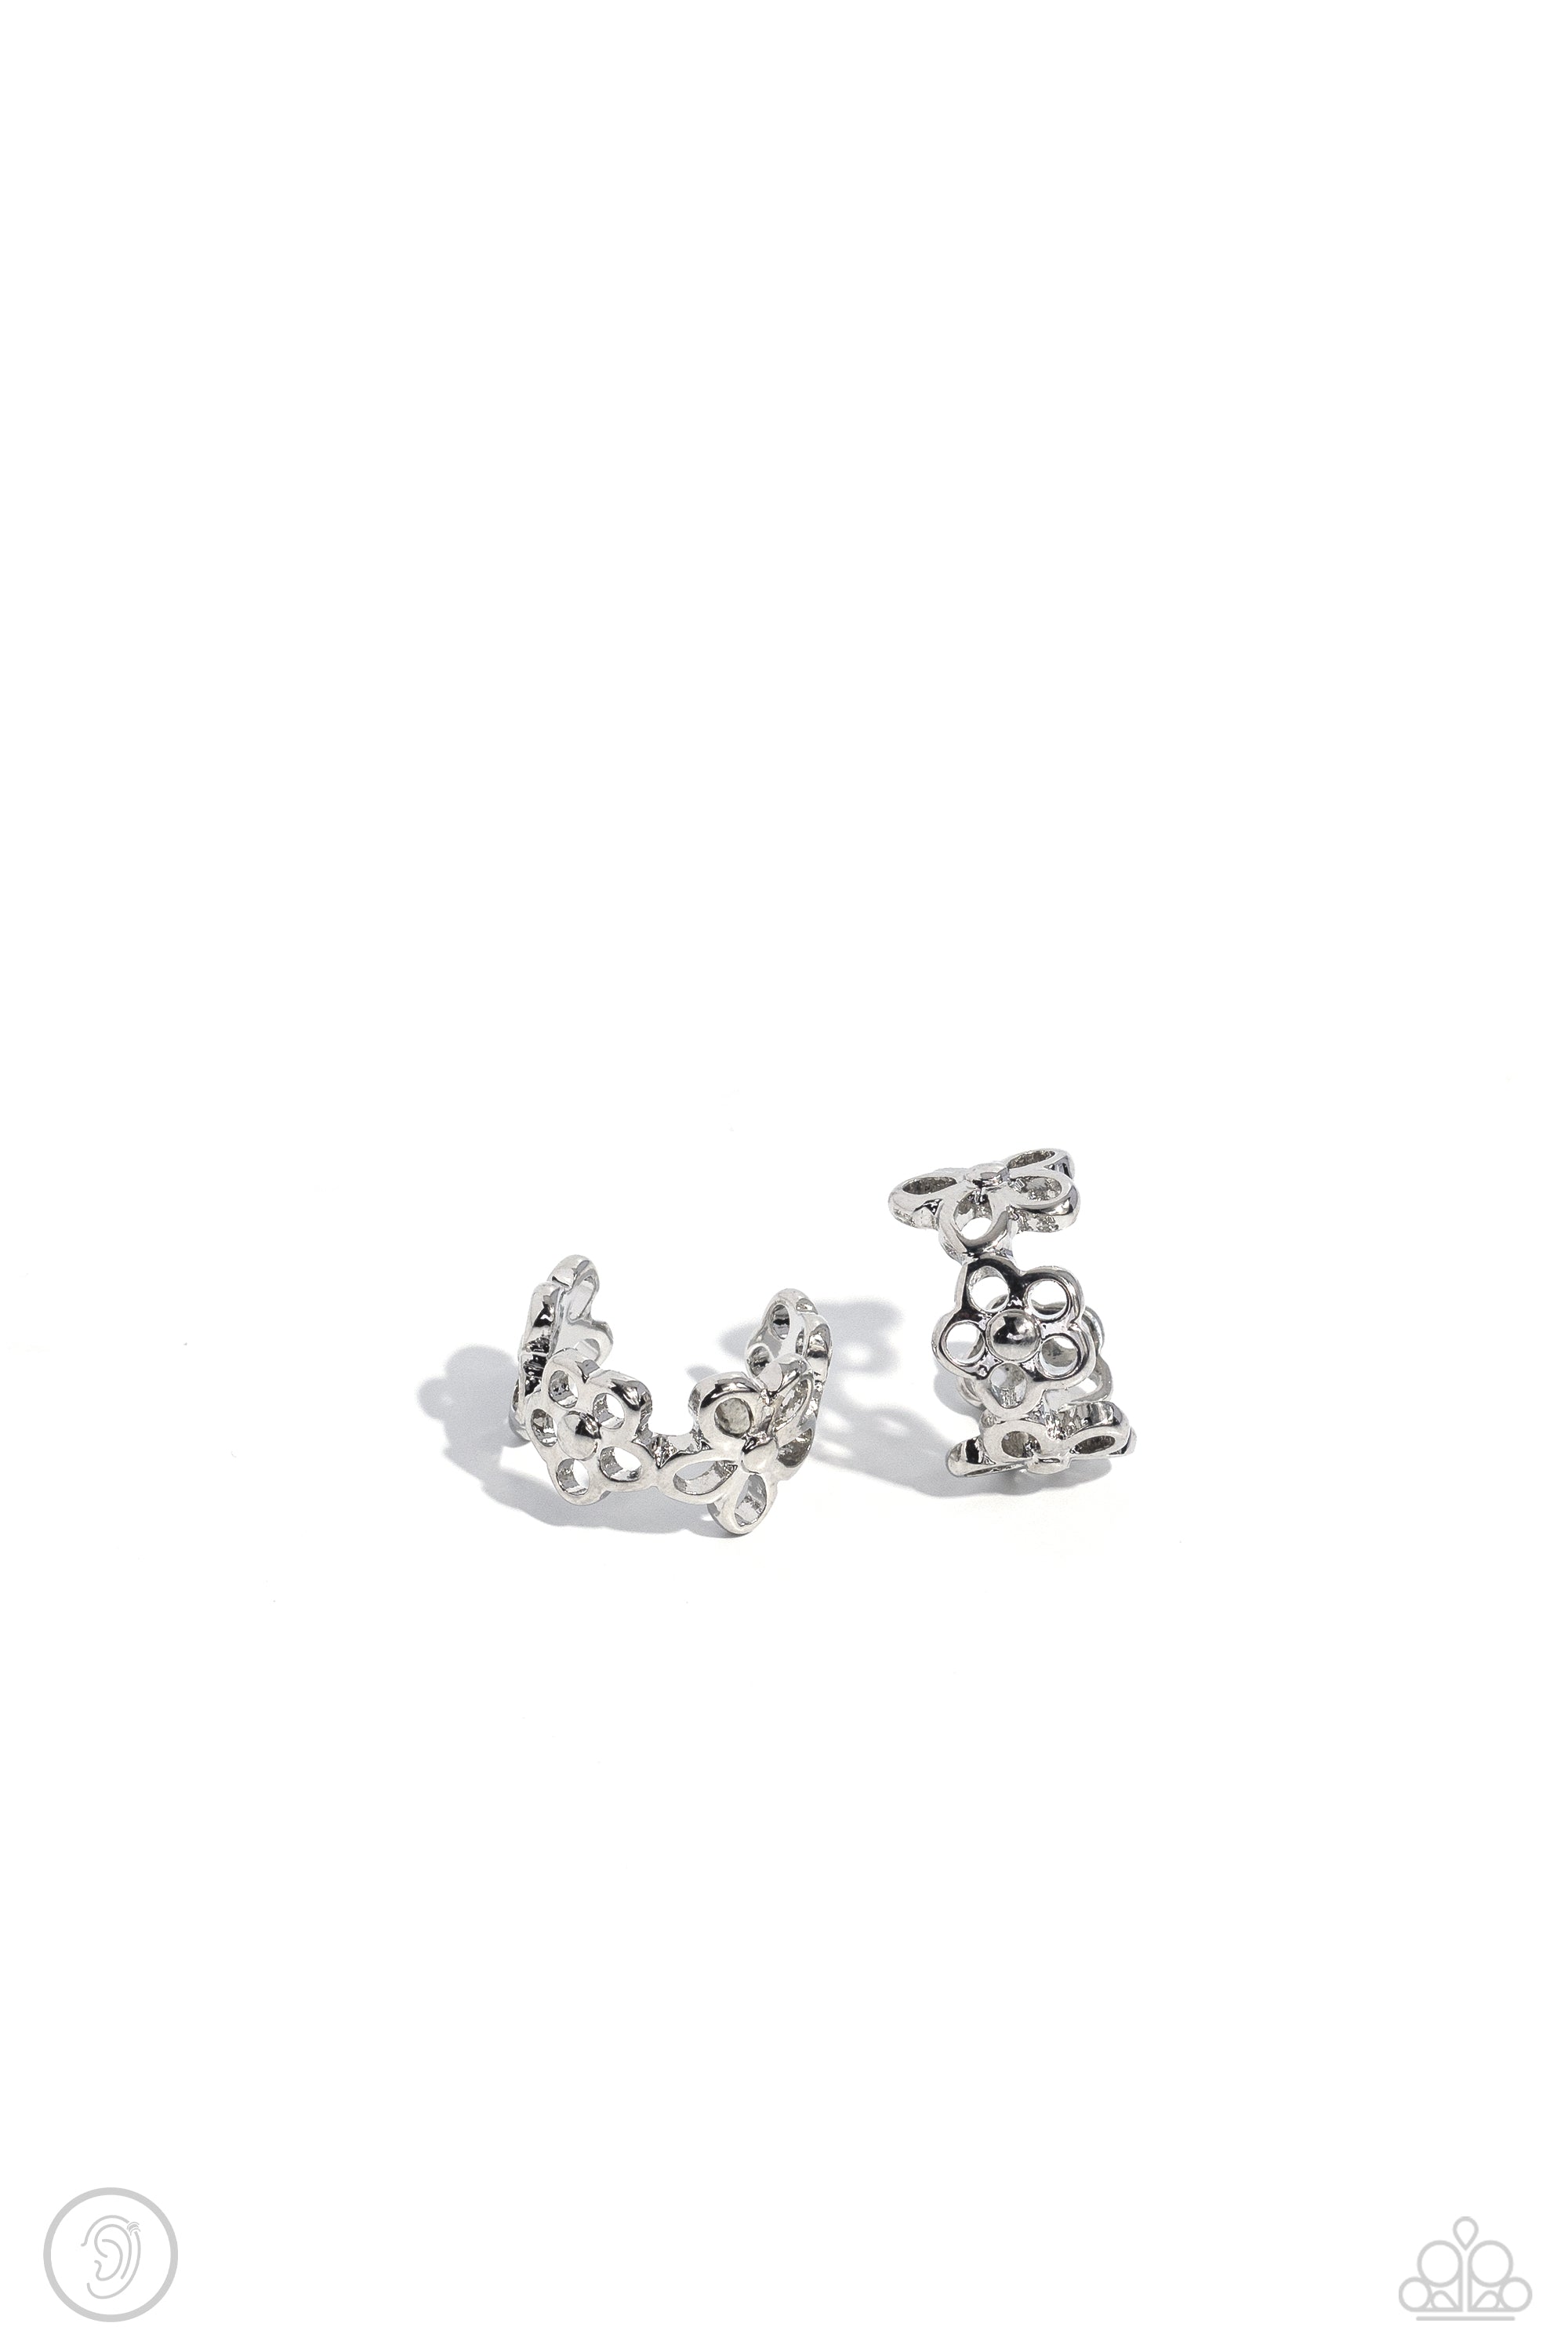 Daisy Debut Silver Cuff Earrings - Paparazzi Accessories- lightbox - CarasShop.com - $5 Jewelry by Cara Jewels